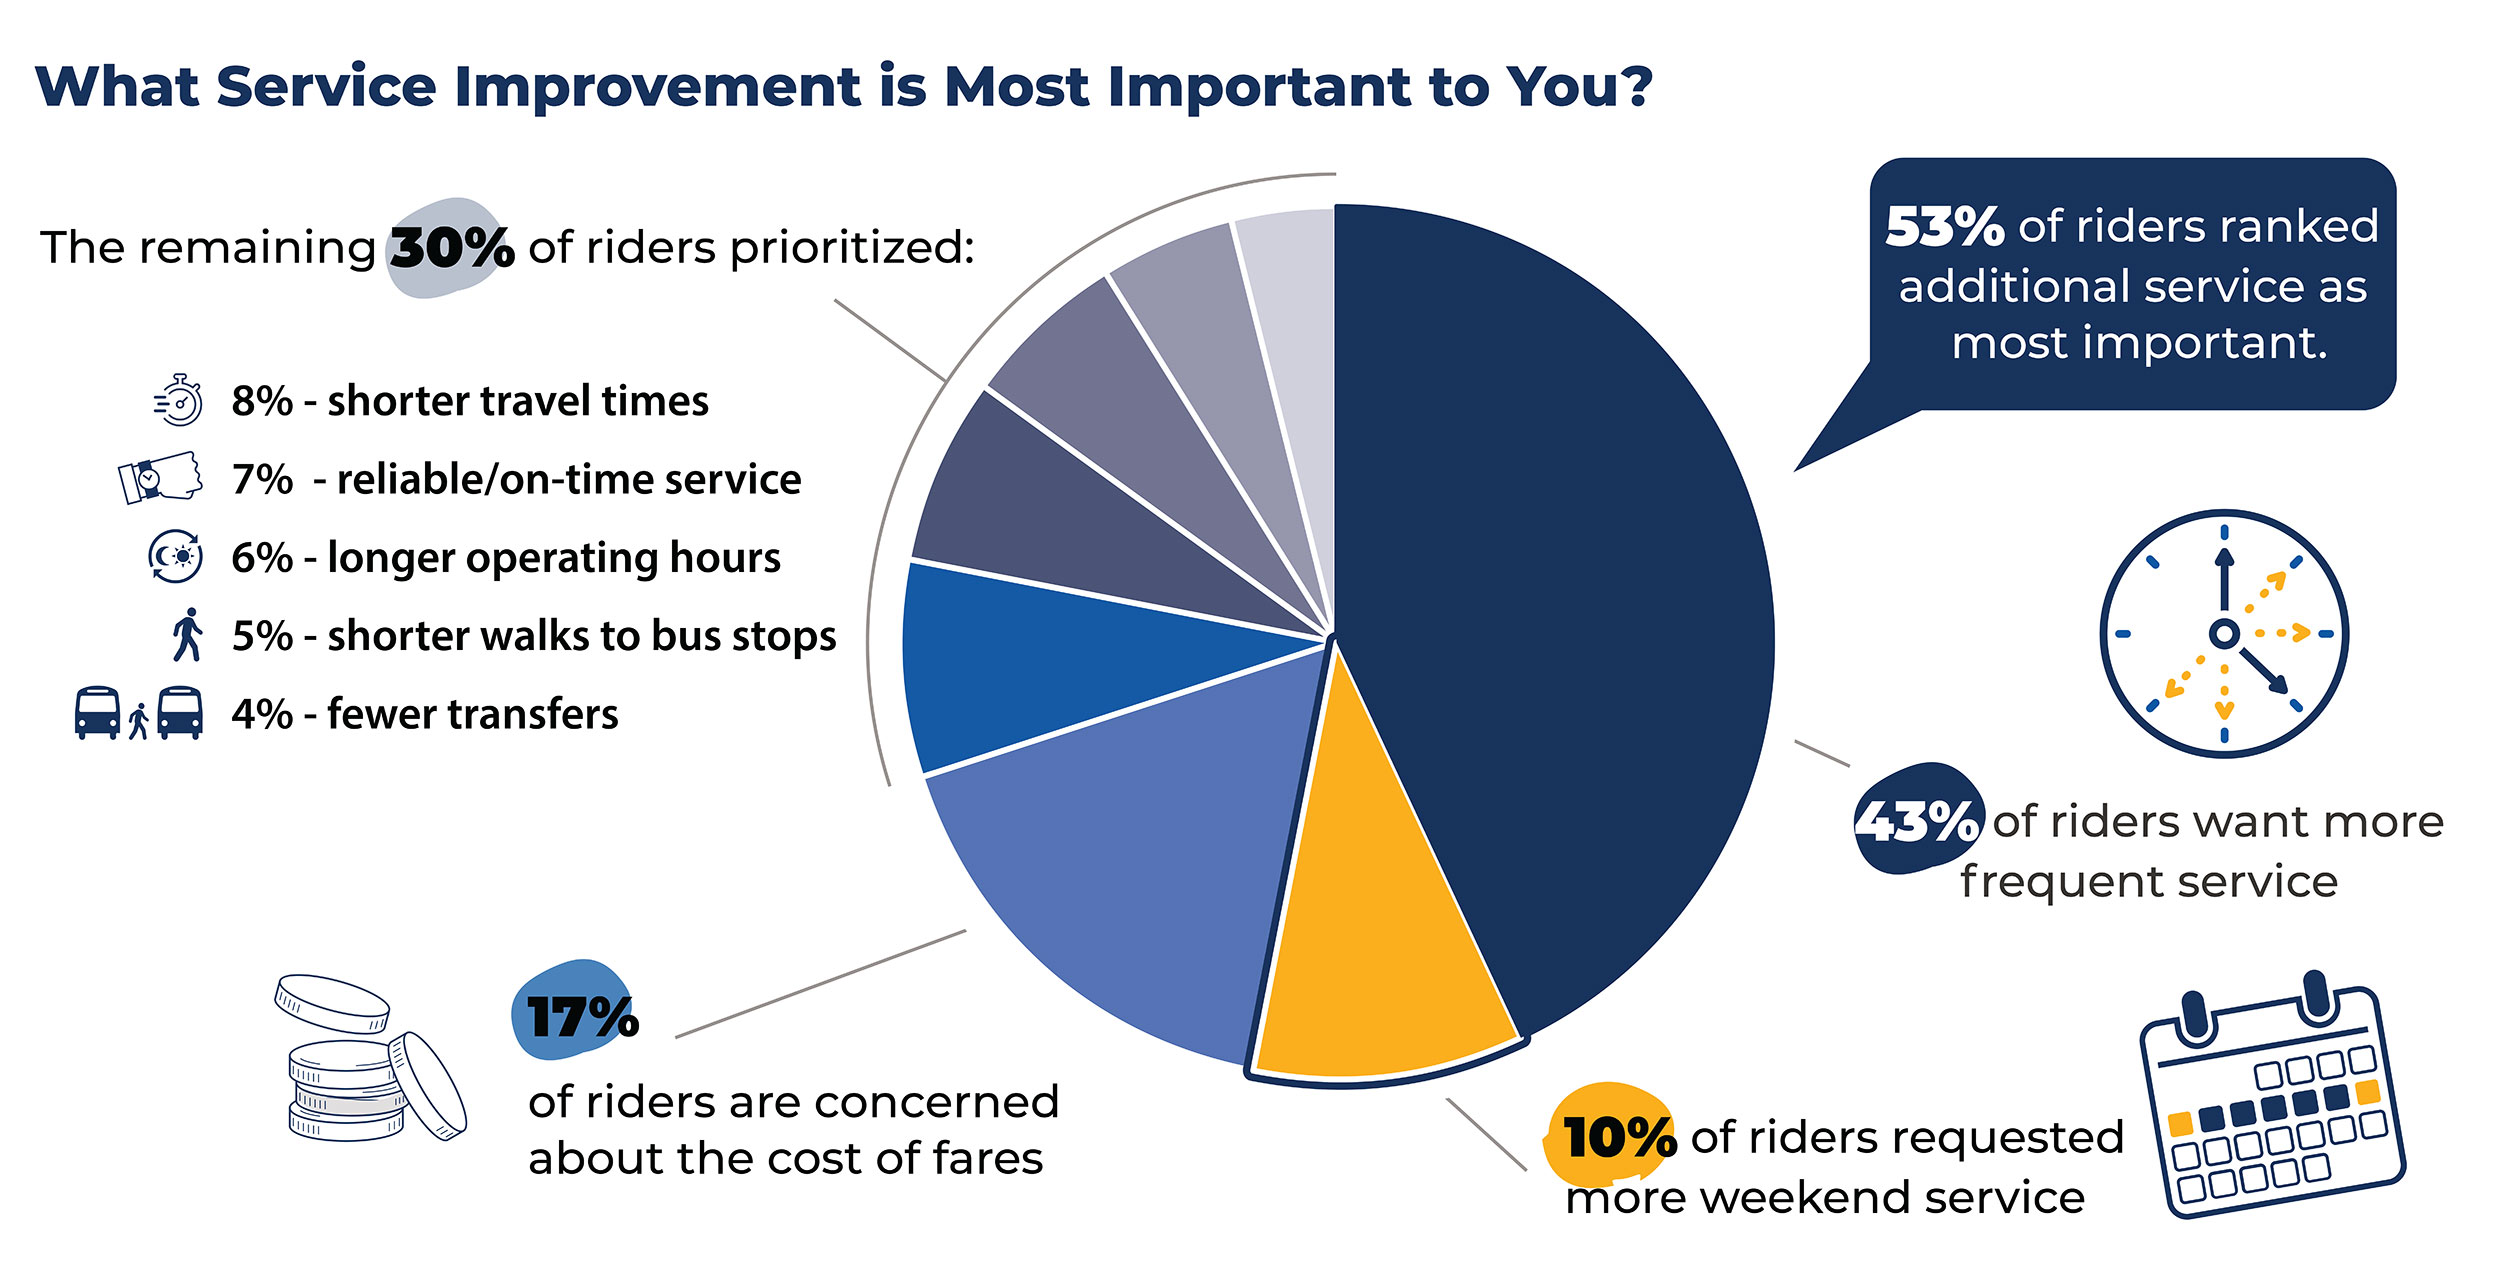 This pie chart shows the most important  service improvements which include the following: 43% of riders want more frequent service, 17% of riders are concerned about the cost of fares, 10% of riders requested more weekend service, and the remaining 30% of riders prioritized: 8% shorter travel time, 7% reliable/on-time service, 6%  longer operating hours, 5% - shorter walks to bus stop and 4% - fewer transfers.